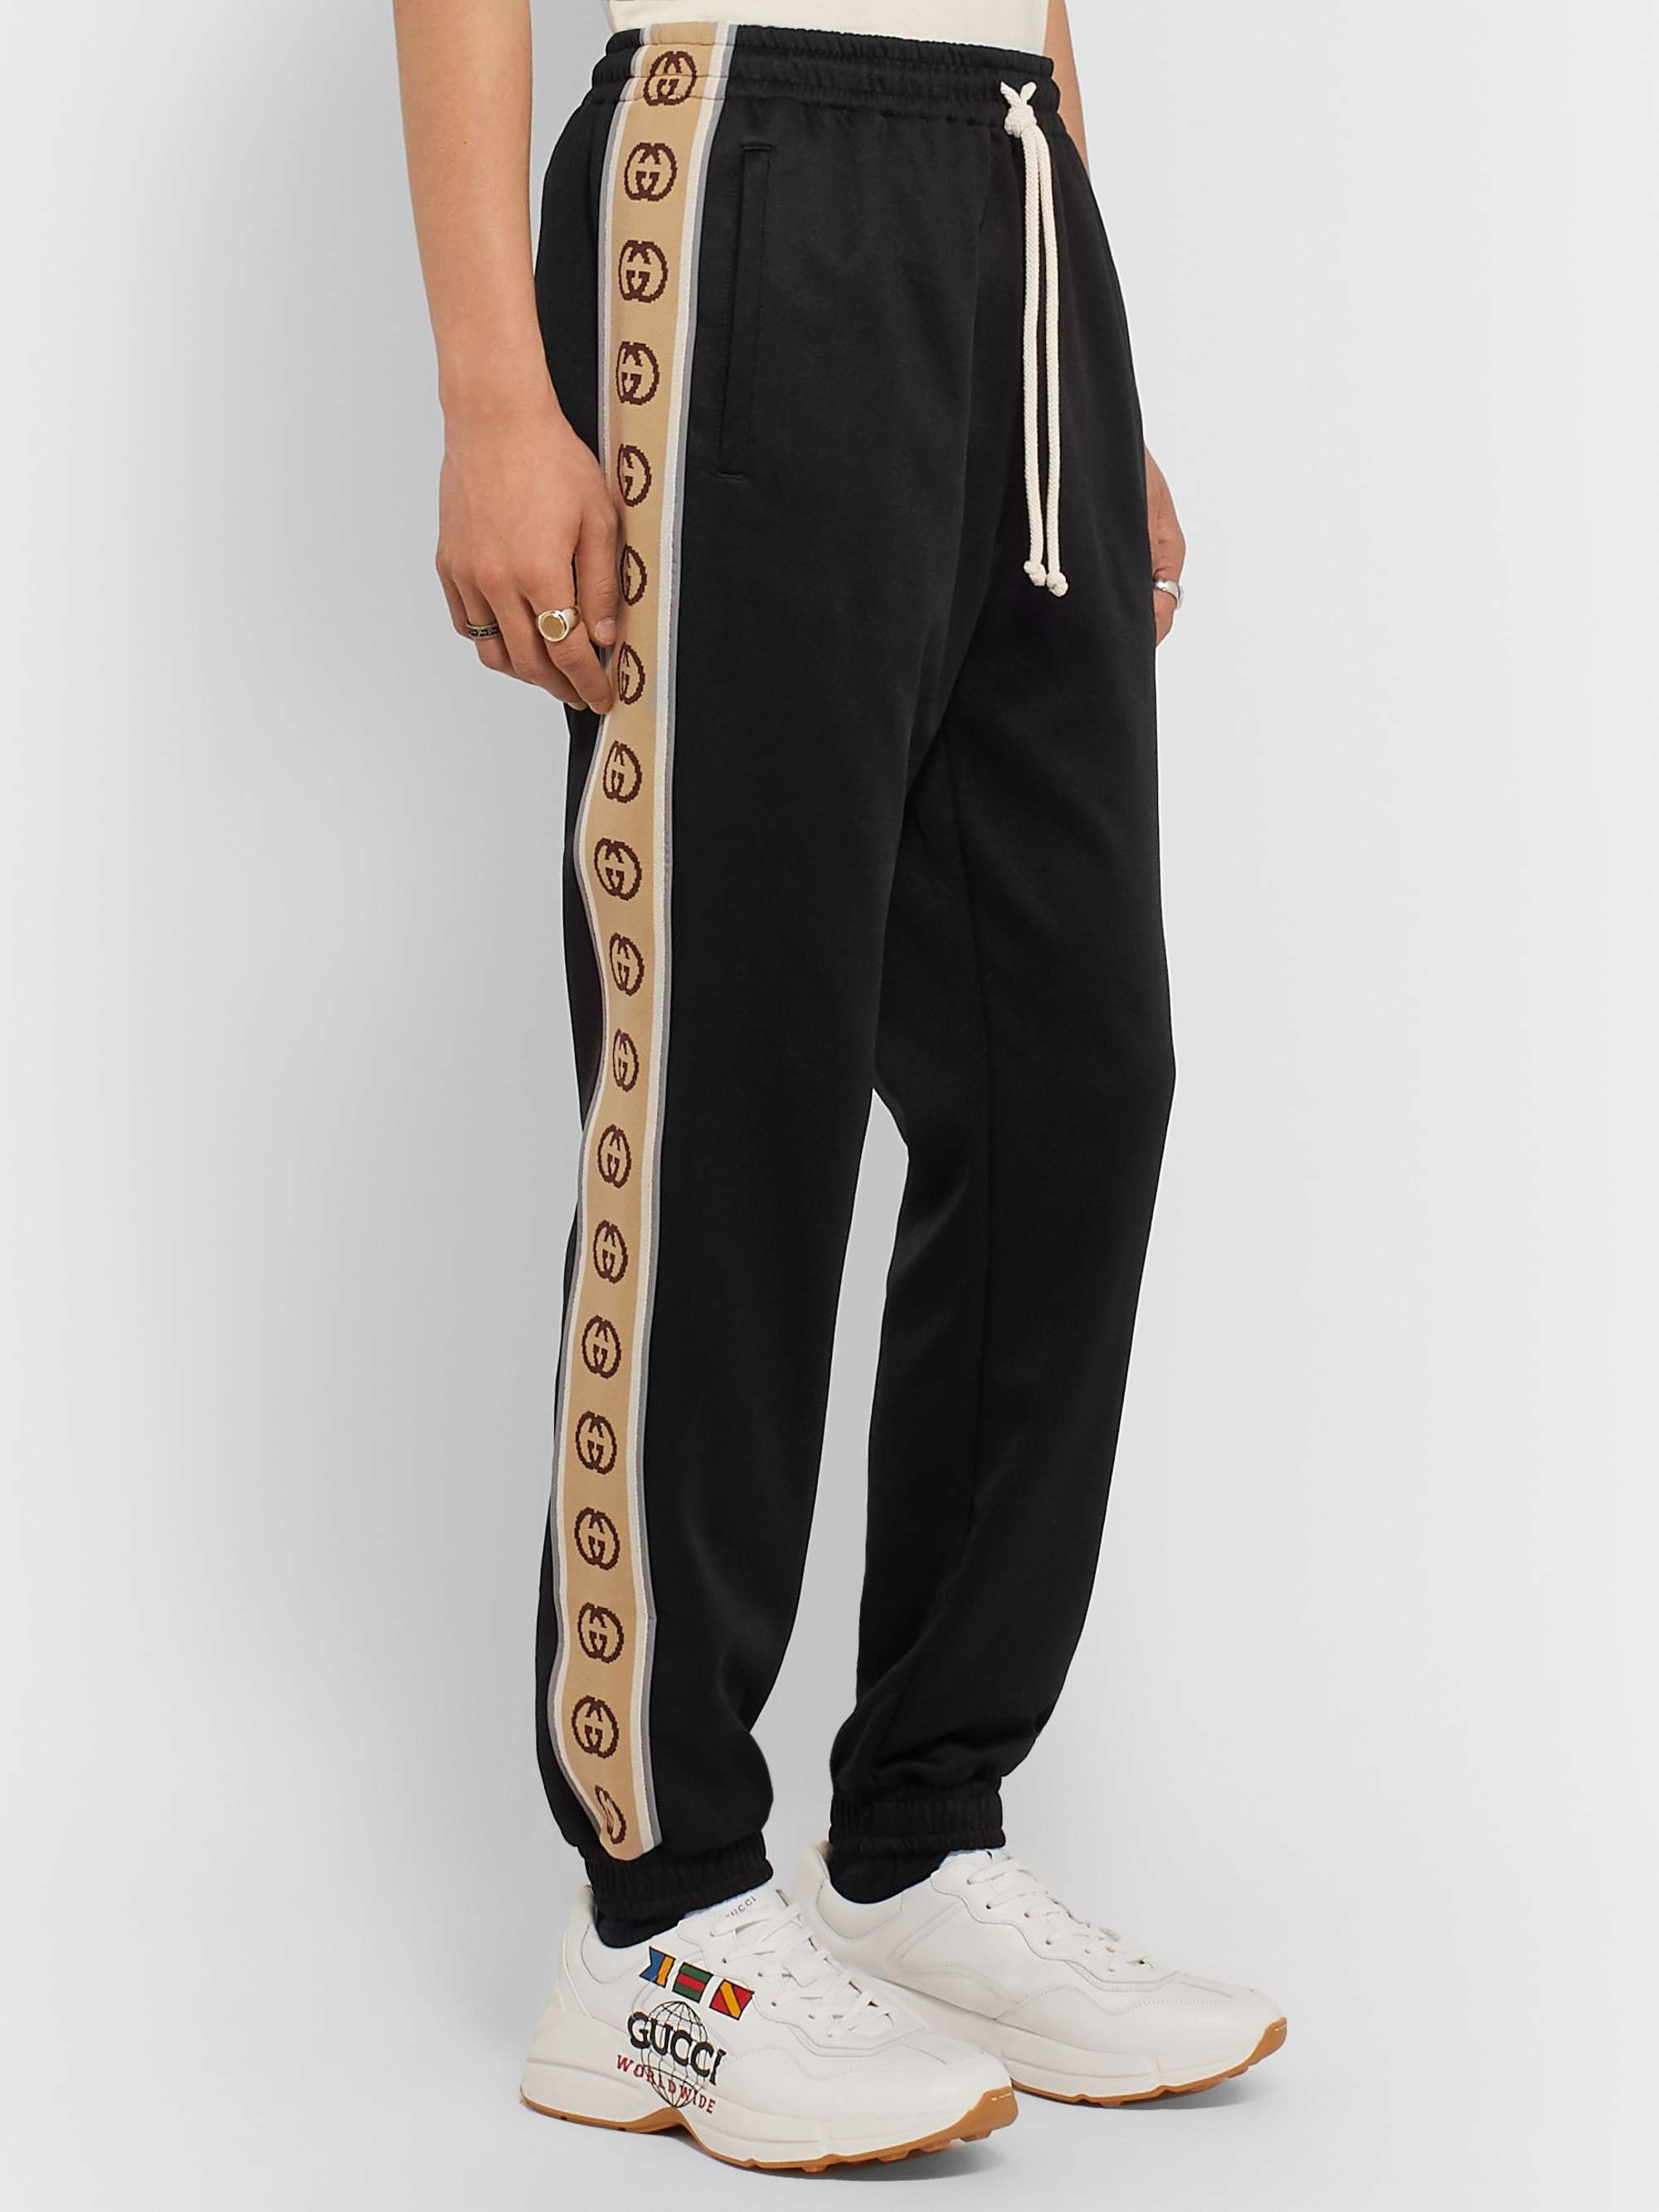 GUCCI Tapered Webbing-Trimmed Jersey Sweatpants for Men